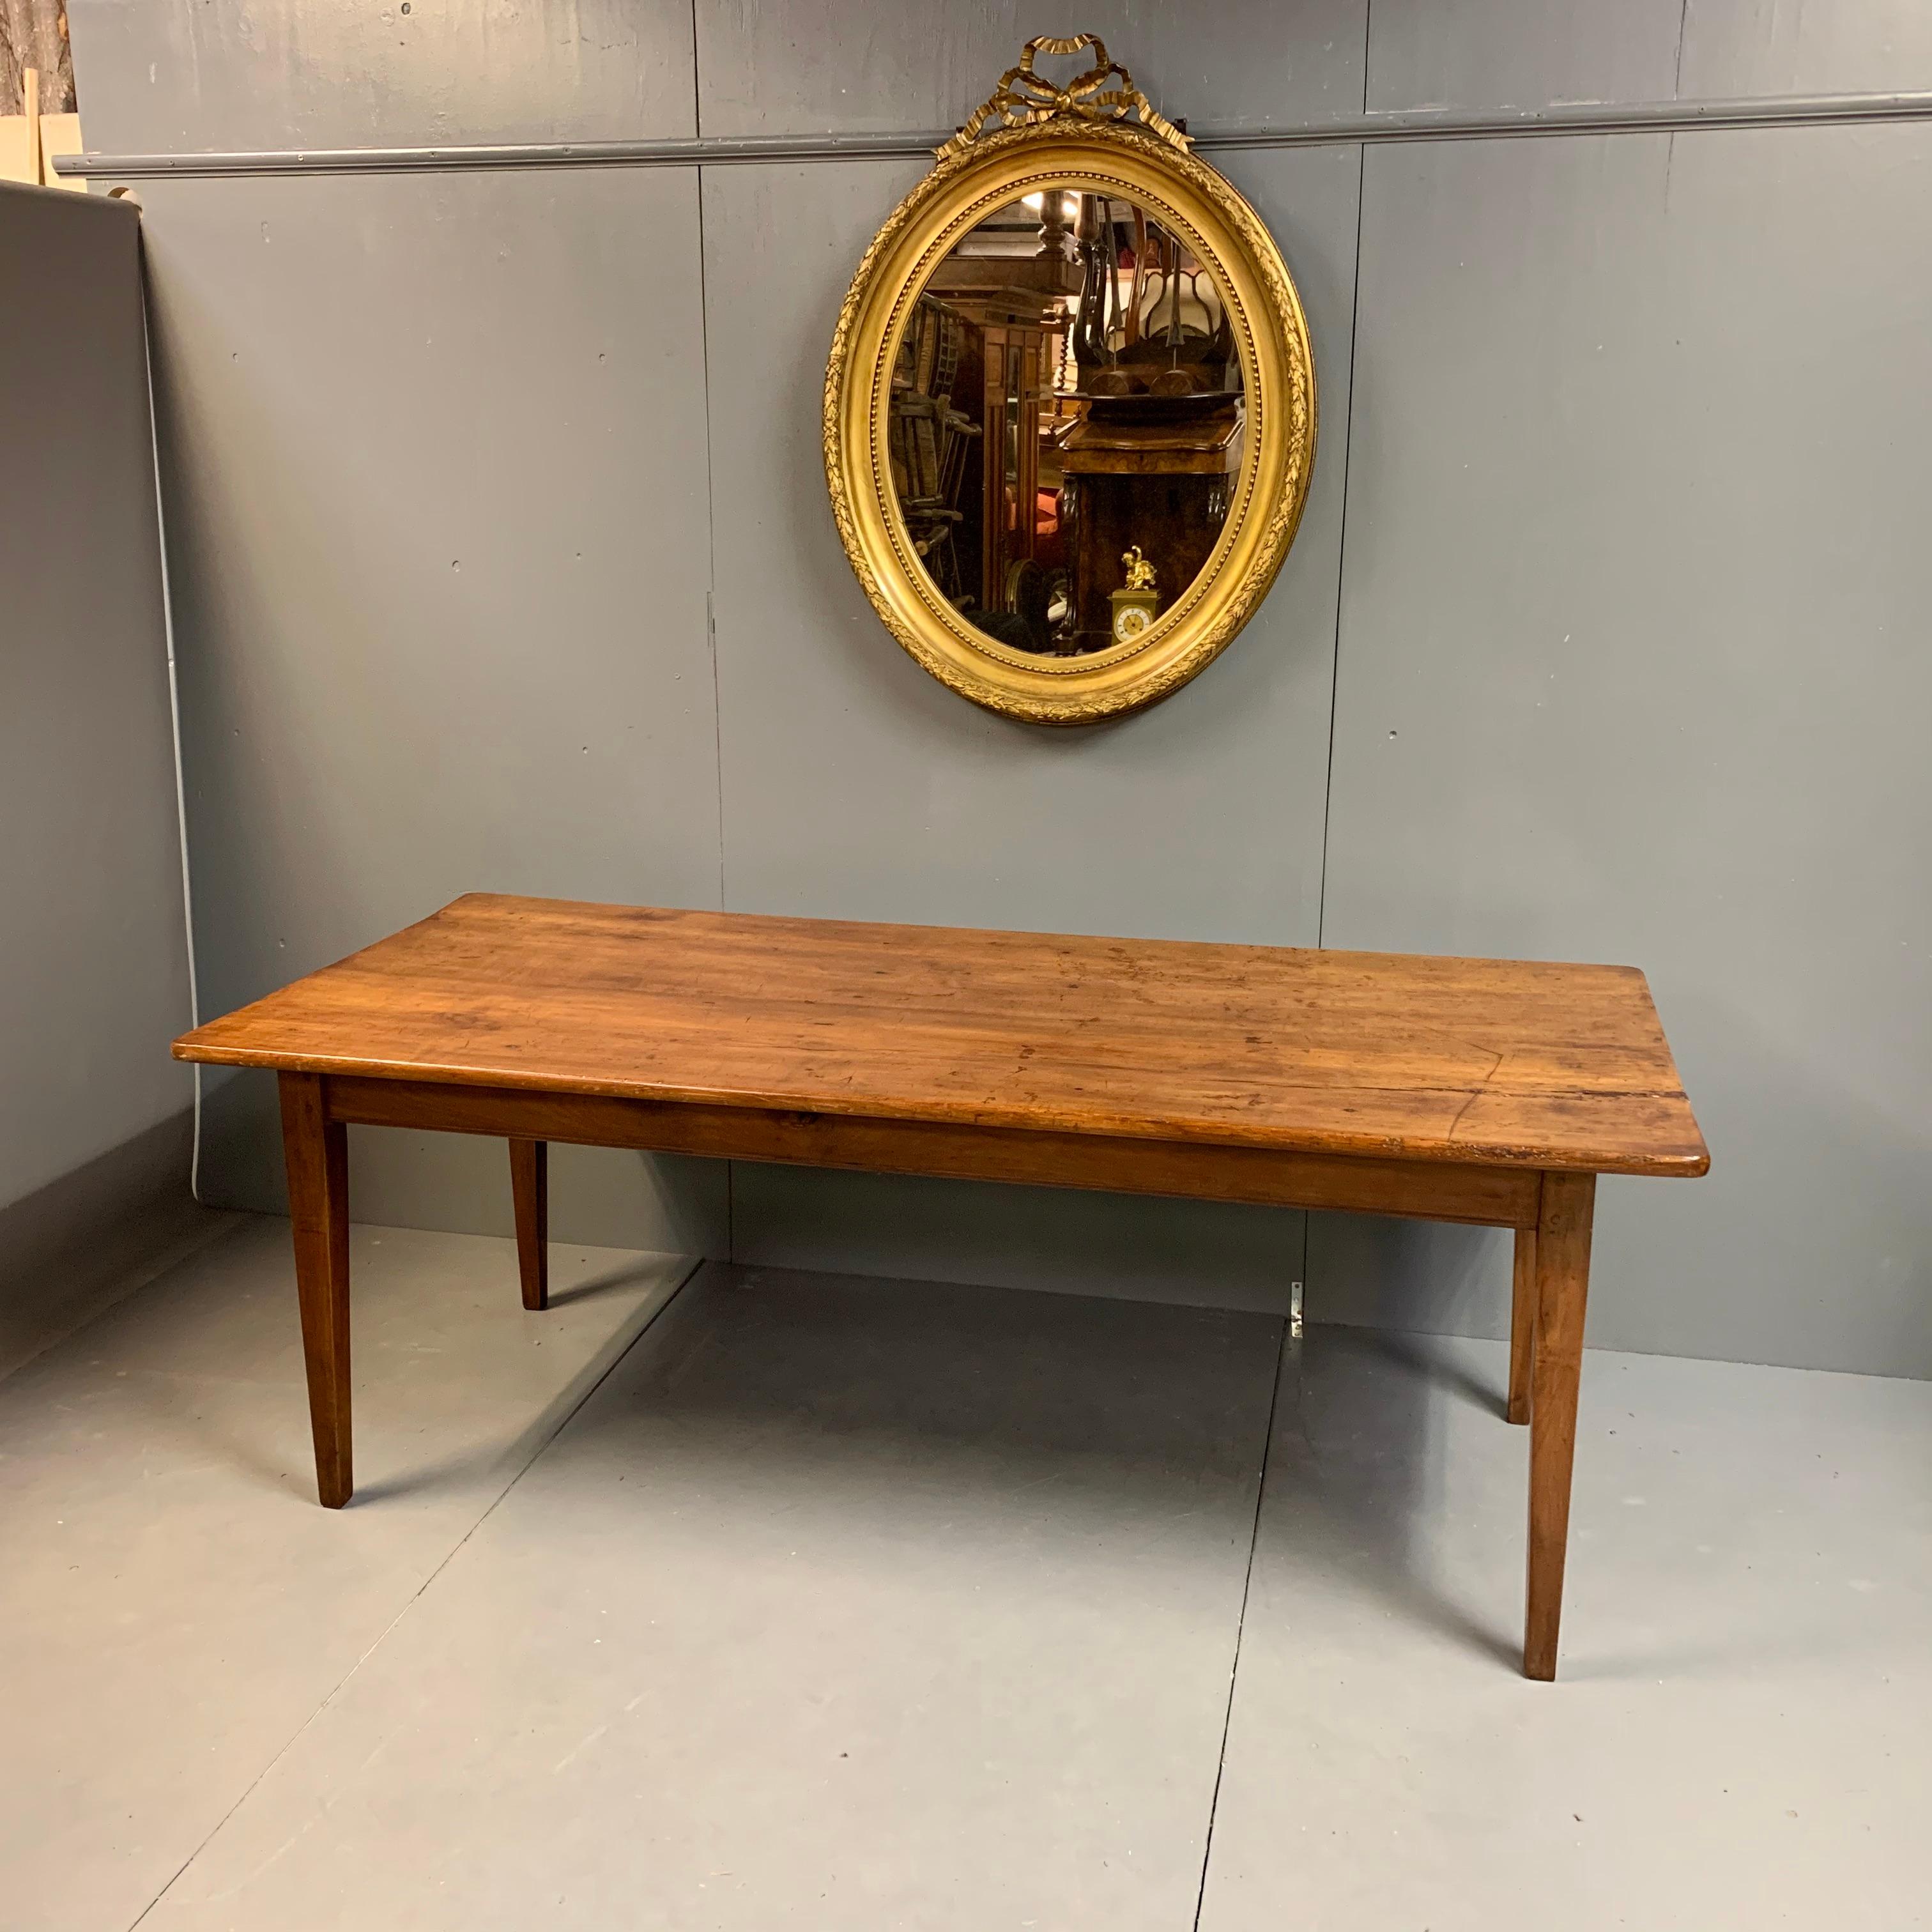 This is a beautiful early 19th century French cherrywood farmhouse table with the wide top made from just two planks.
The table is a comfortable 8-10-seat size and with the pullout / pull-out carving slide makes for a comfortable 10-seat size.